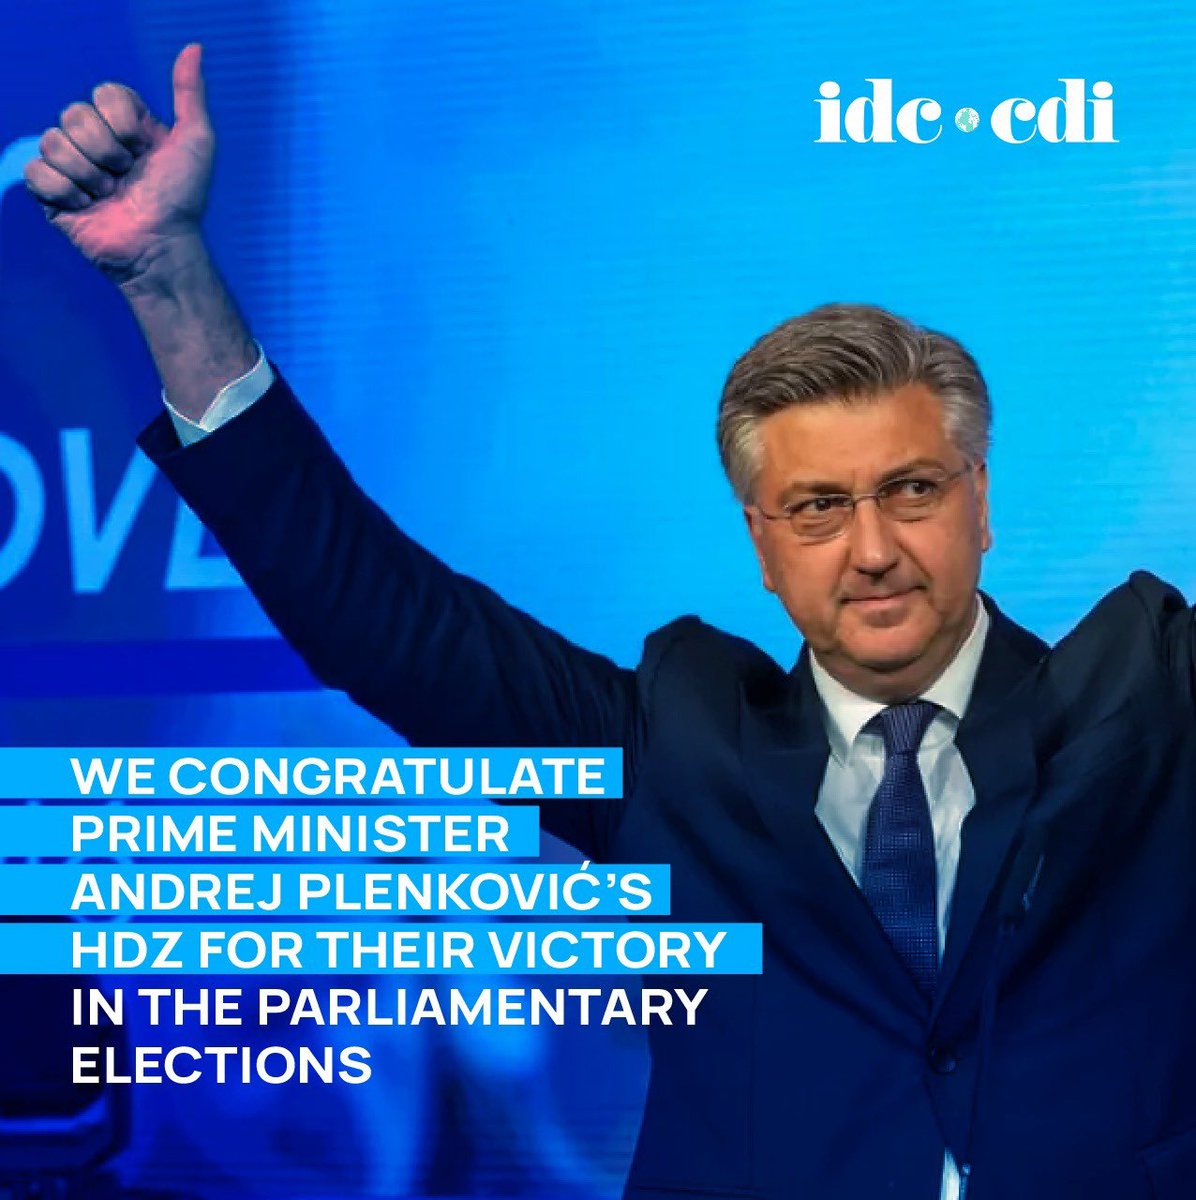 Congratulations to PM @AndrejPlenkovic on his victory in the parliamentary elections held yesterday in #Croatia. Croatians once again demonstrate their confidence in a government well managed by our party member @HDZ and led by an #idccdi Vice-President 🇭🇷